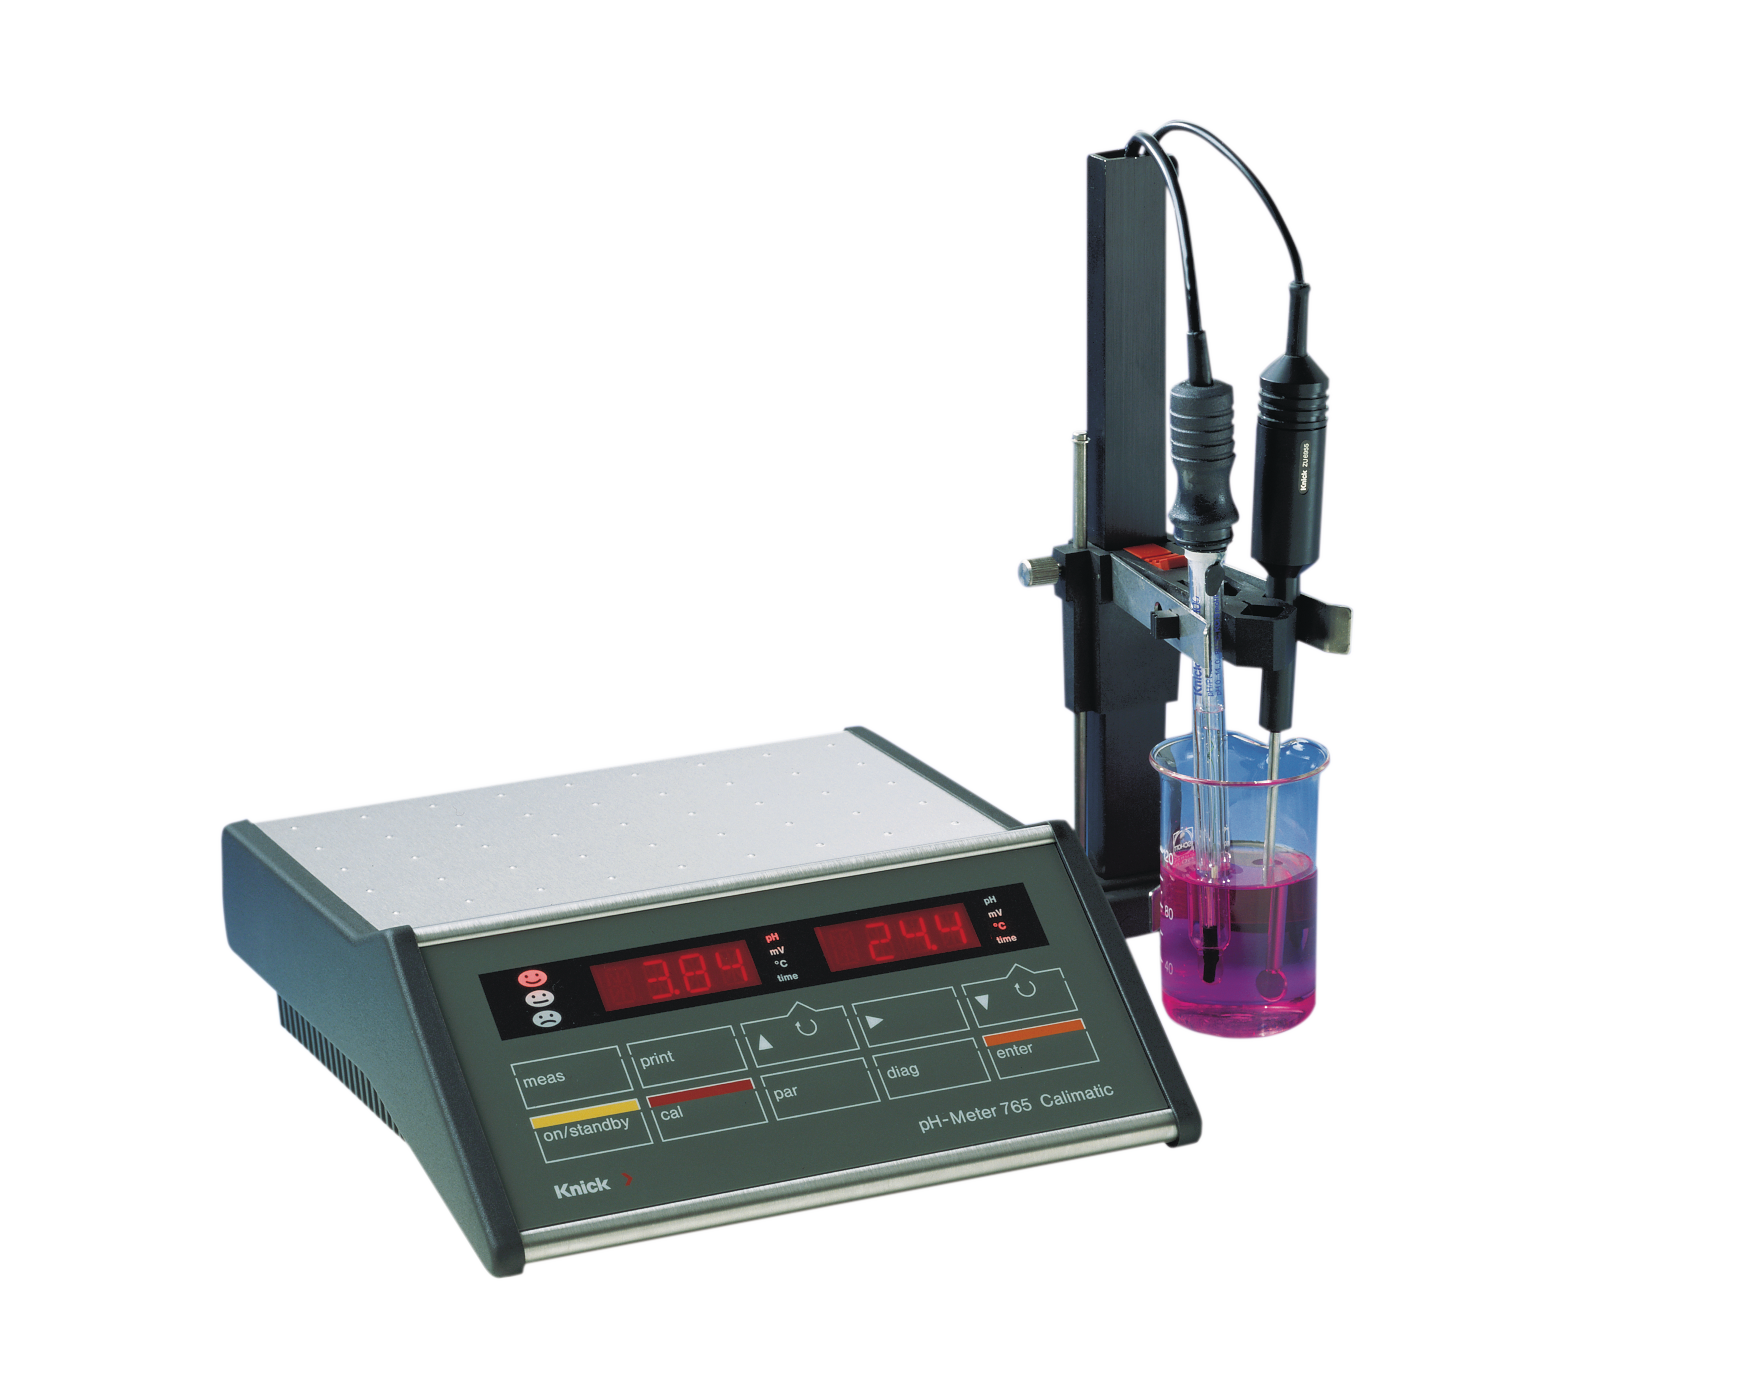 765 Laboratory pH Meter | Automatic device test (Fullcheck) and calibration (Calimatic) | Records for QM documentation according to ISO 9000 and GLP